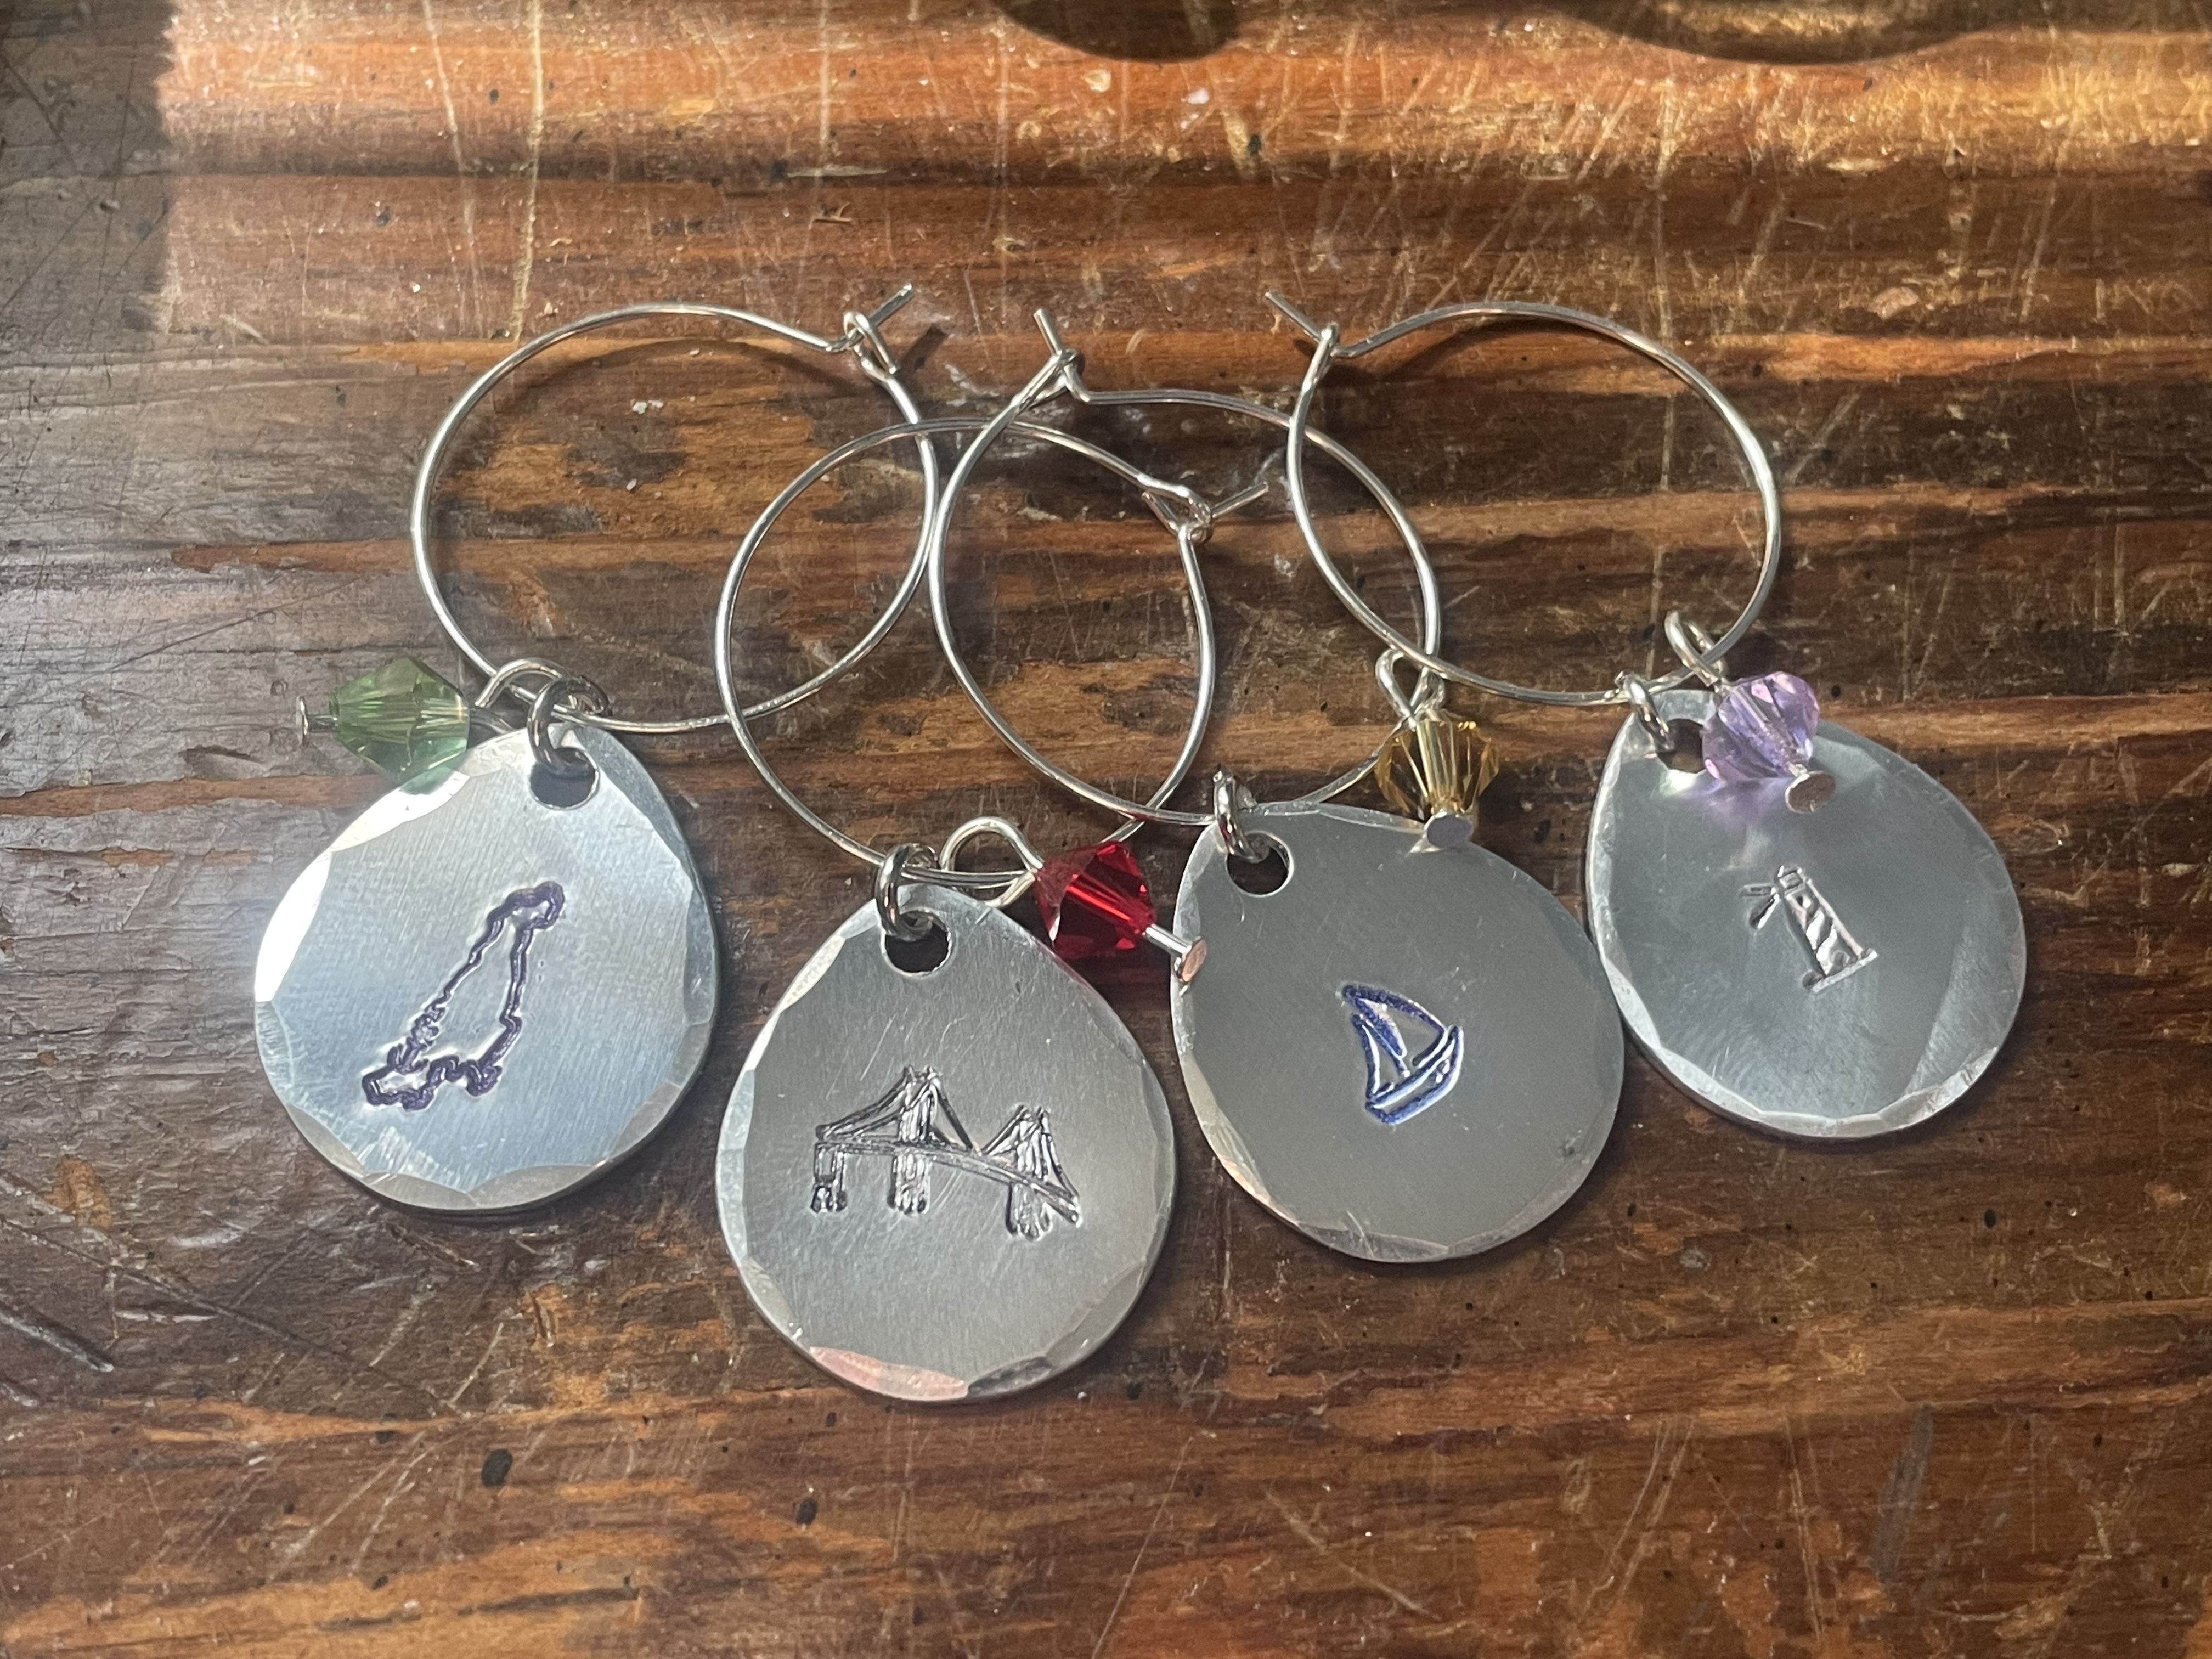 Aquidneck Island Wine Charm  comes in a set of 4 and they are made in Rhode Island